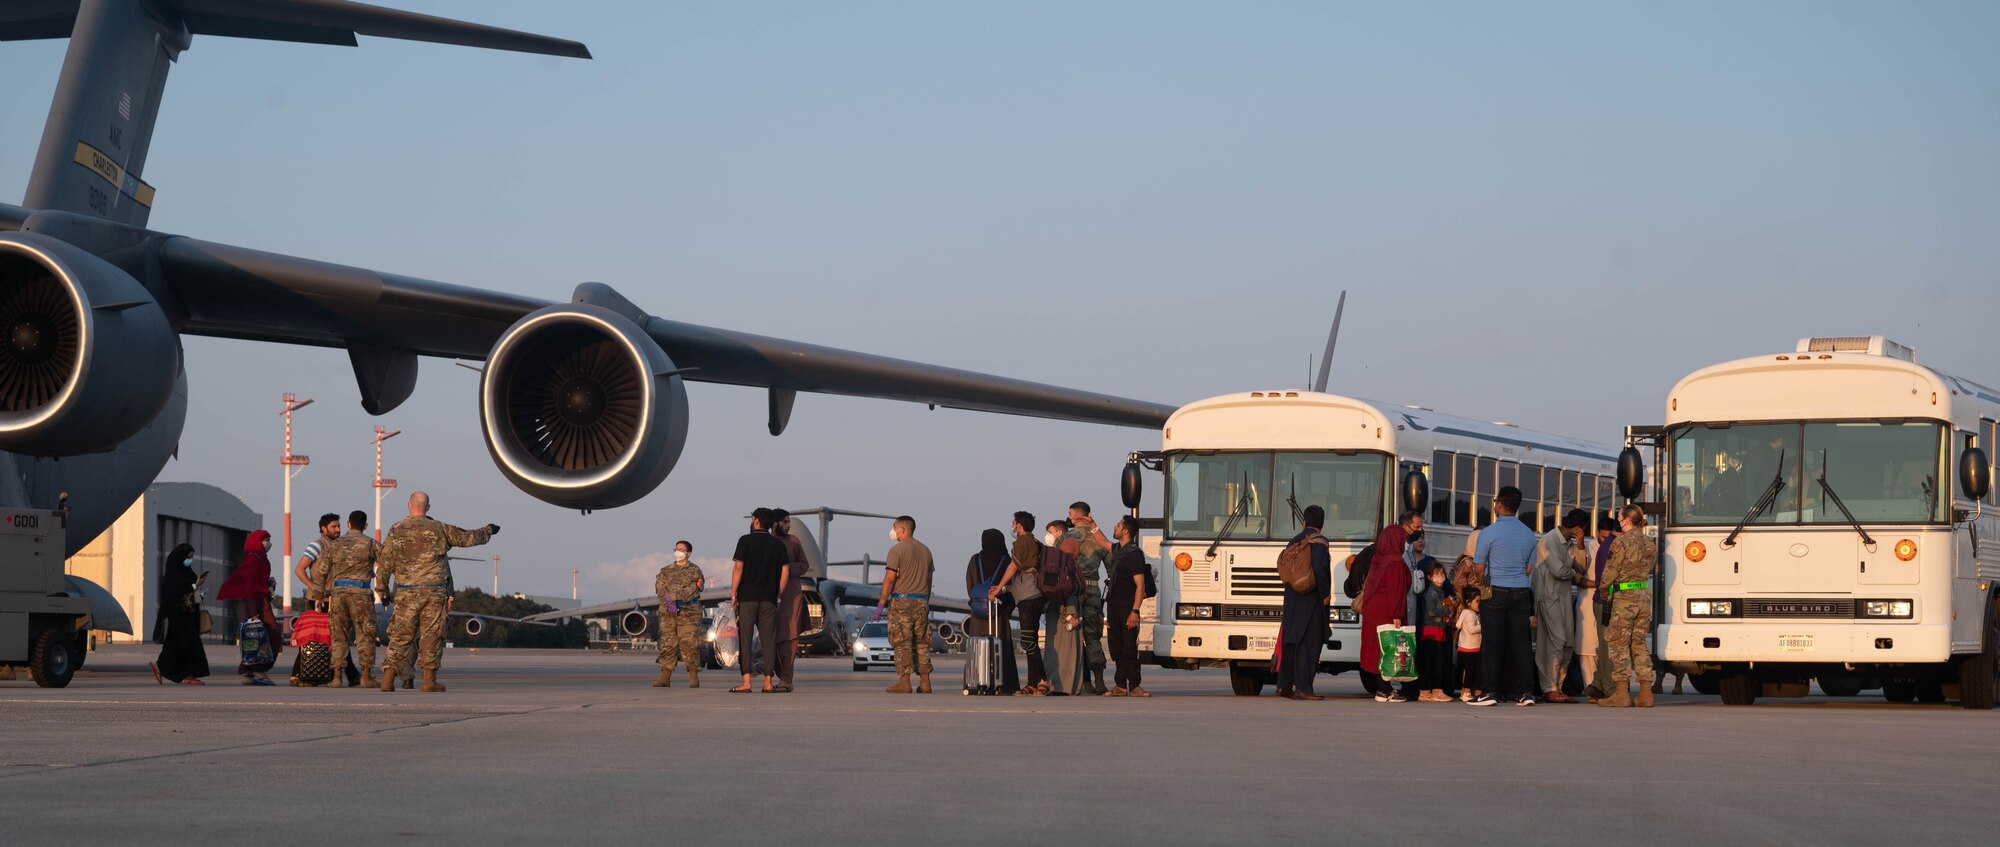 People board buses next to aircraft.